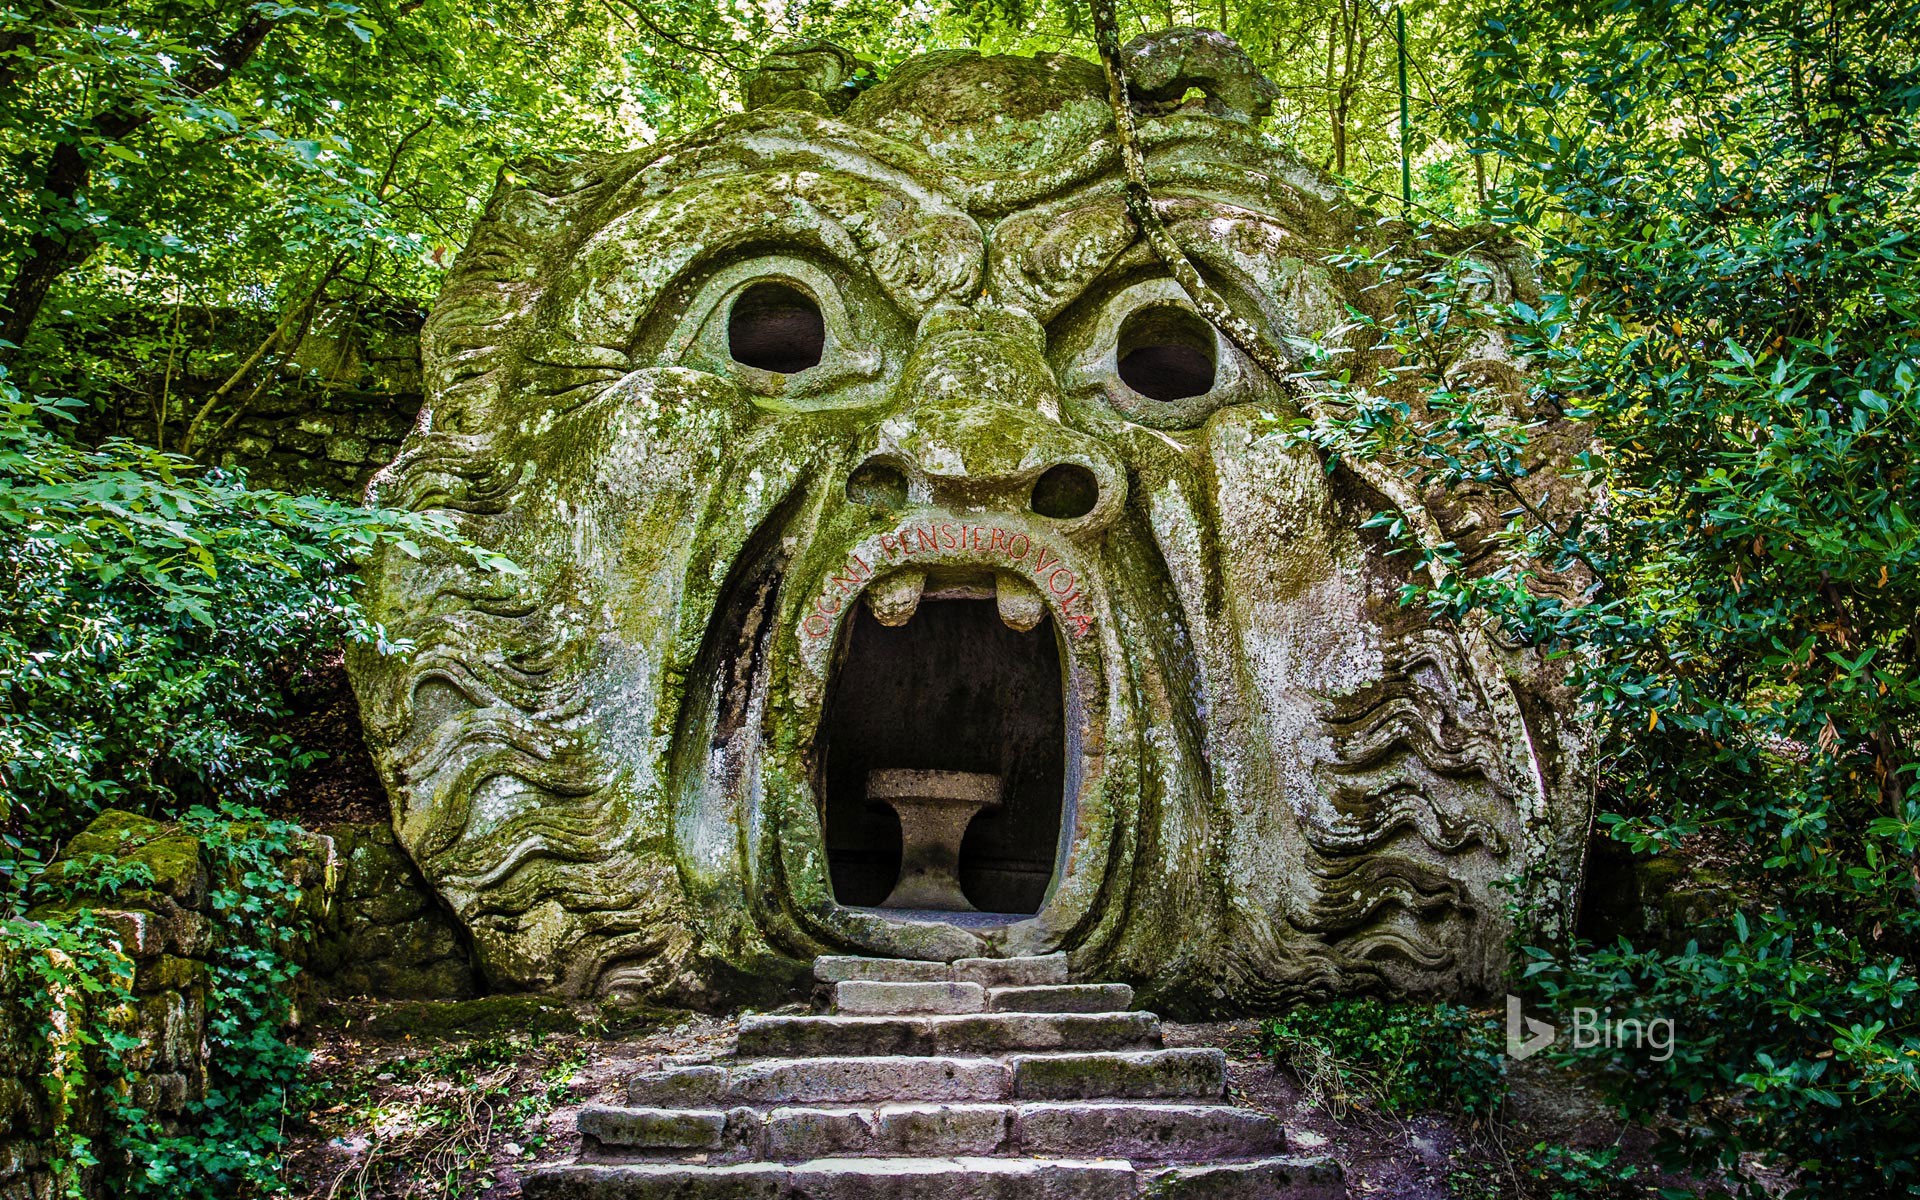 Orcus in the Gardens of Bomarzo in Italy